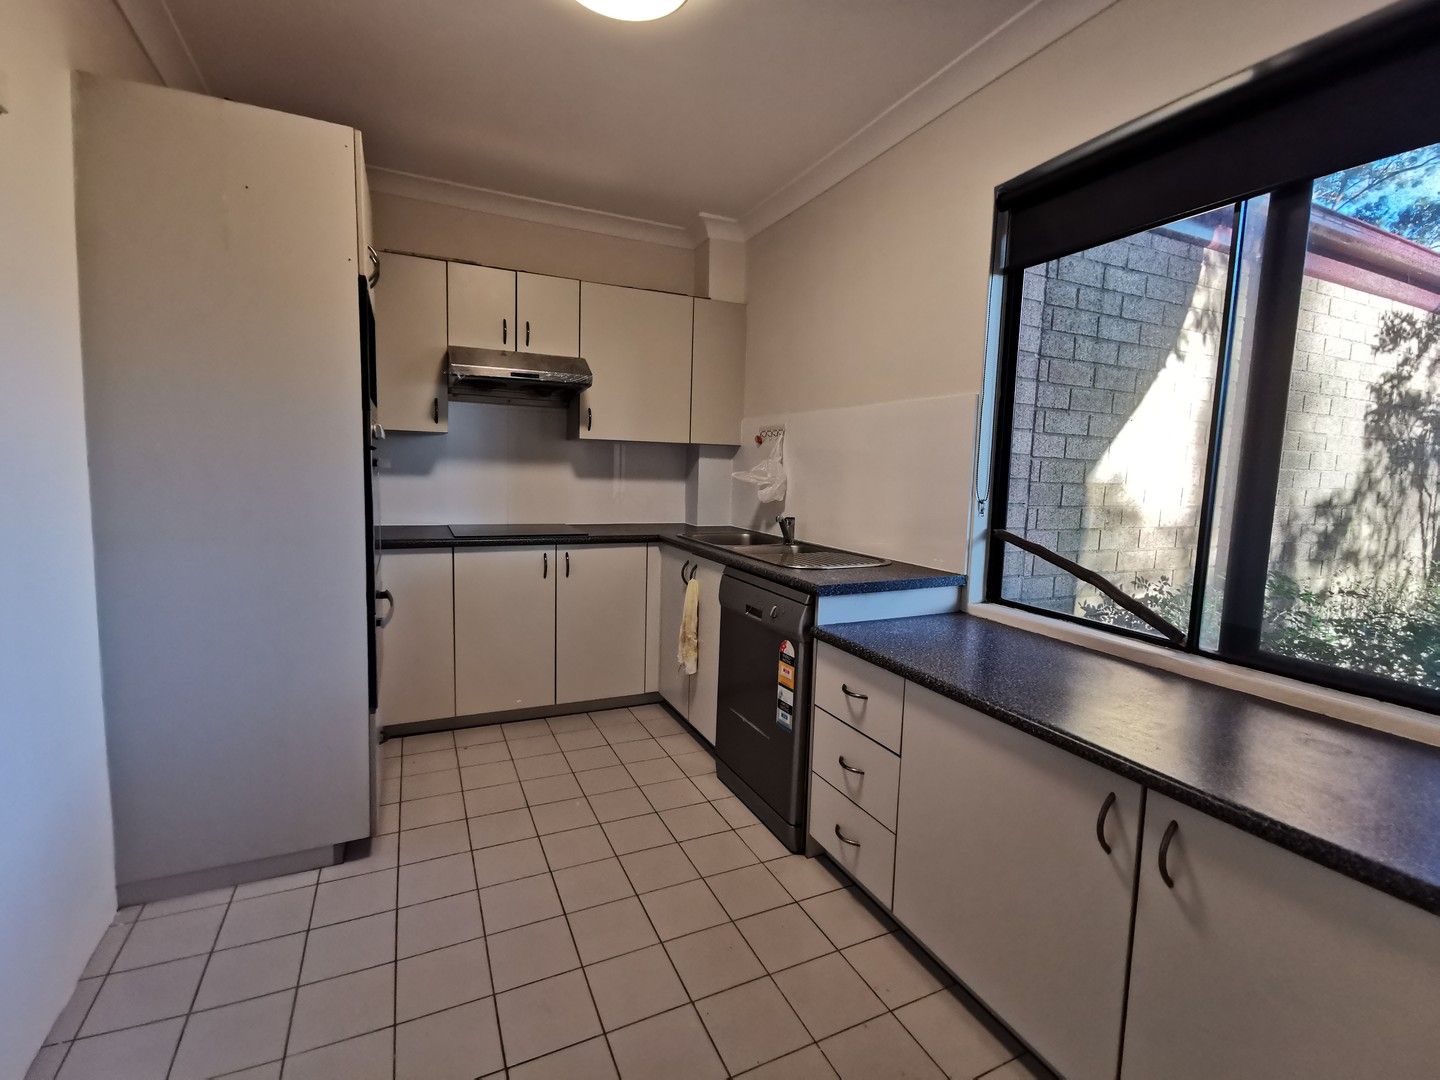 2 bedrooms Apartment / Unit / Flat in 4/28-30 Cairns Street RIVERWOOD NSW, 2210